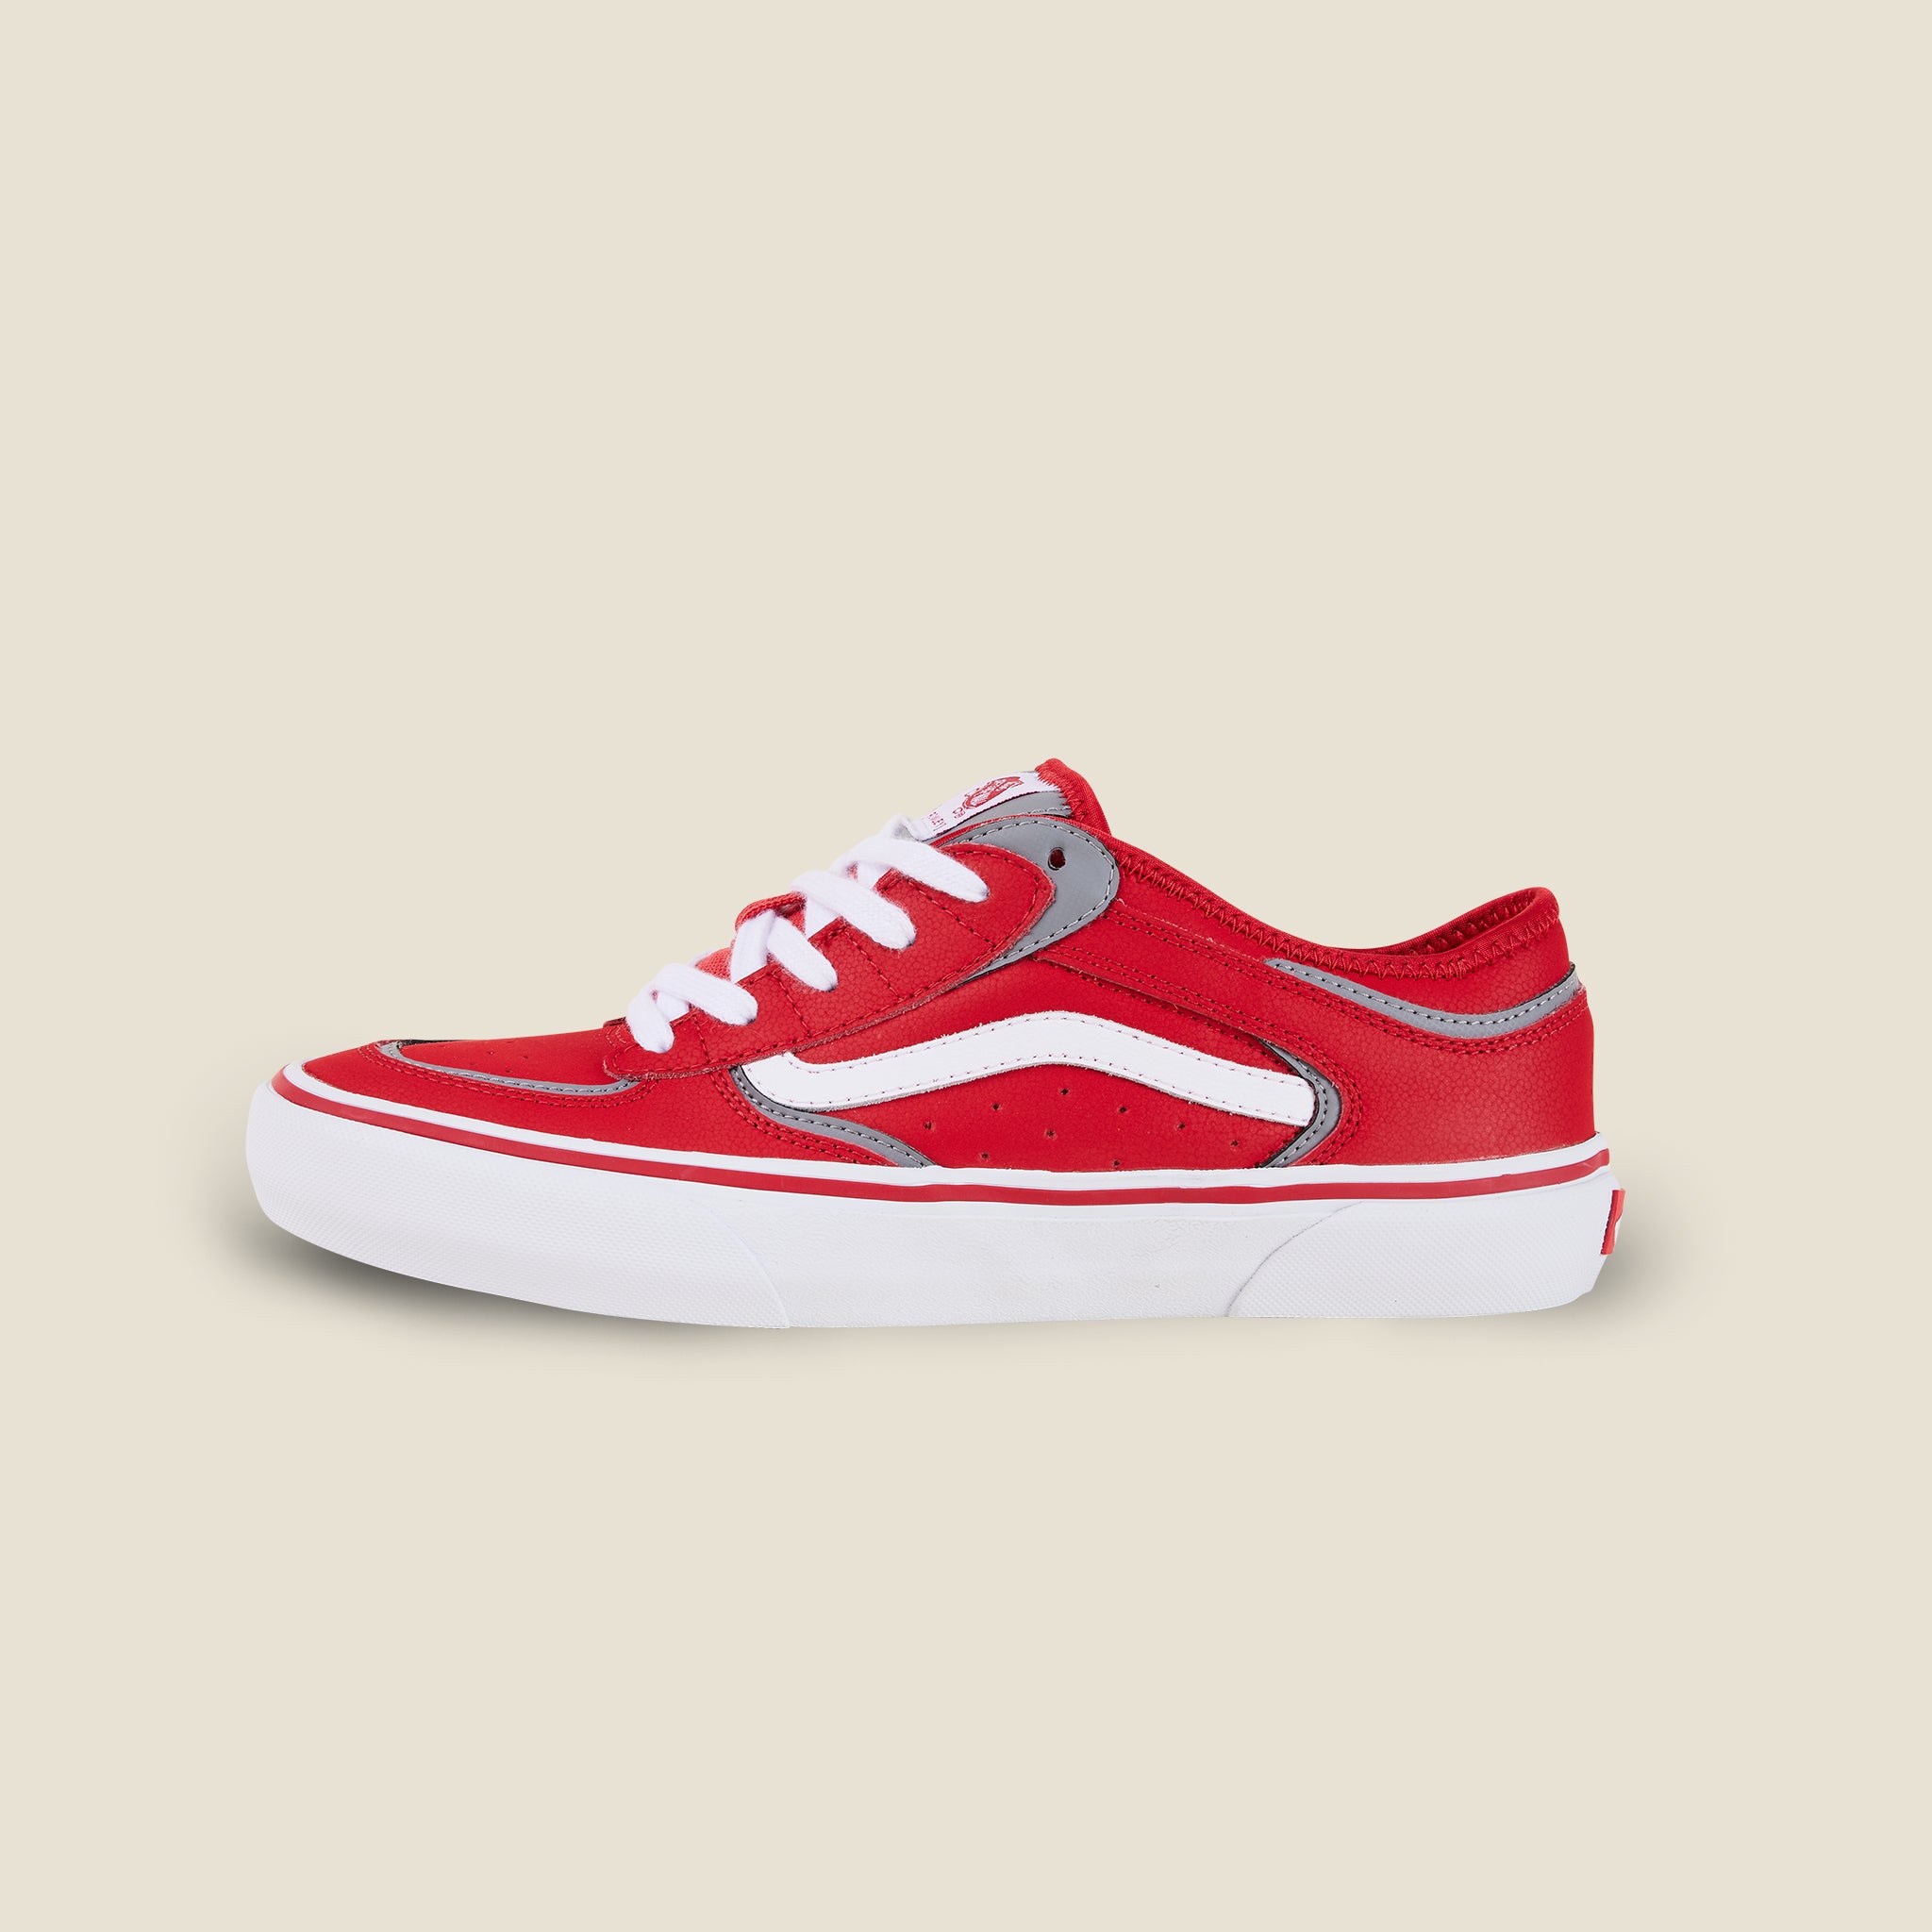 1) VANS Rowley PRO Classic - Red/White 